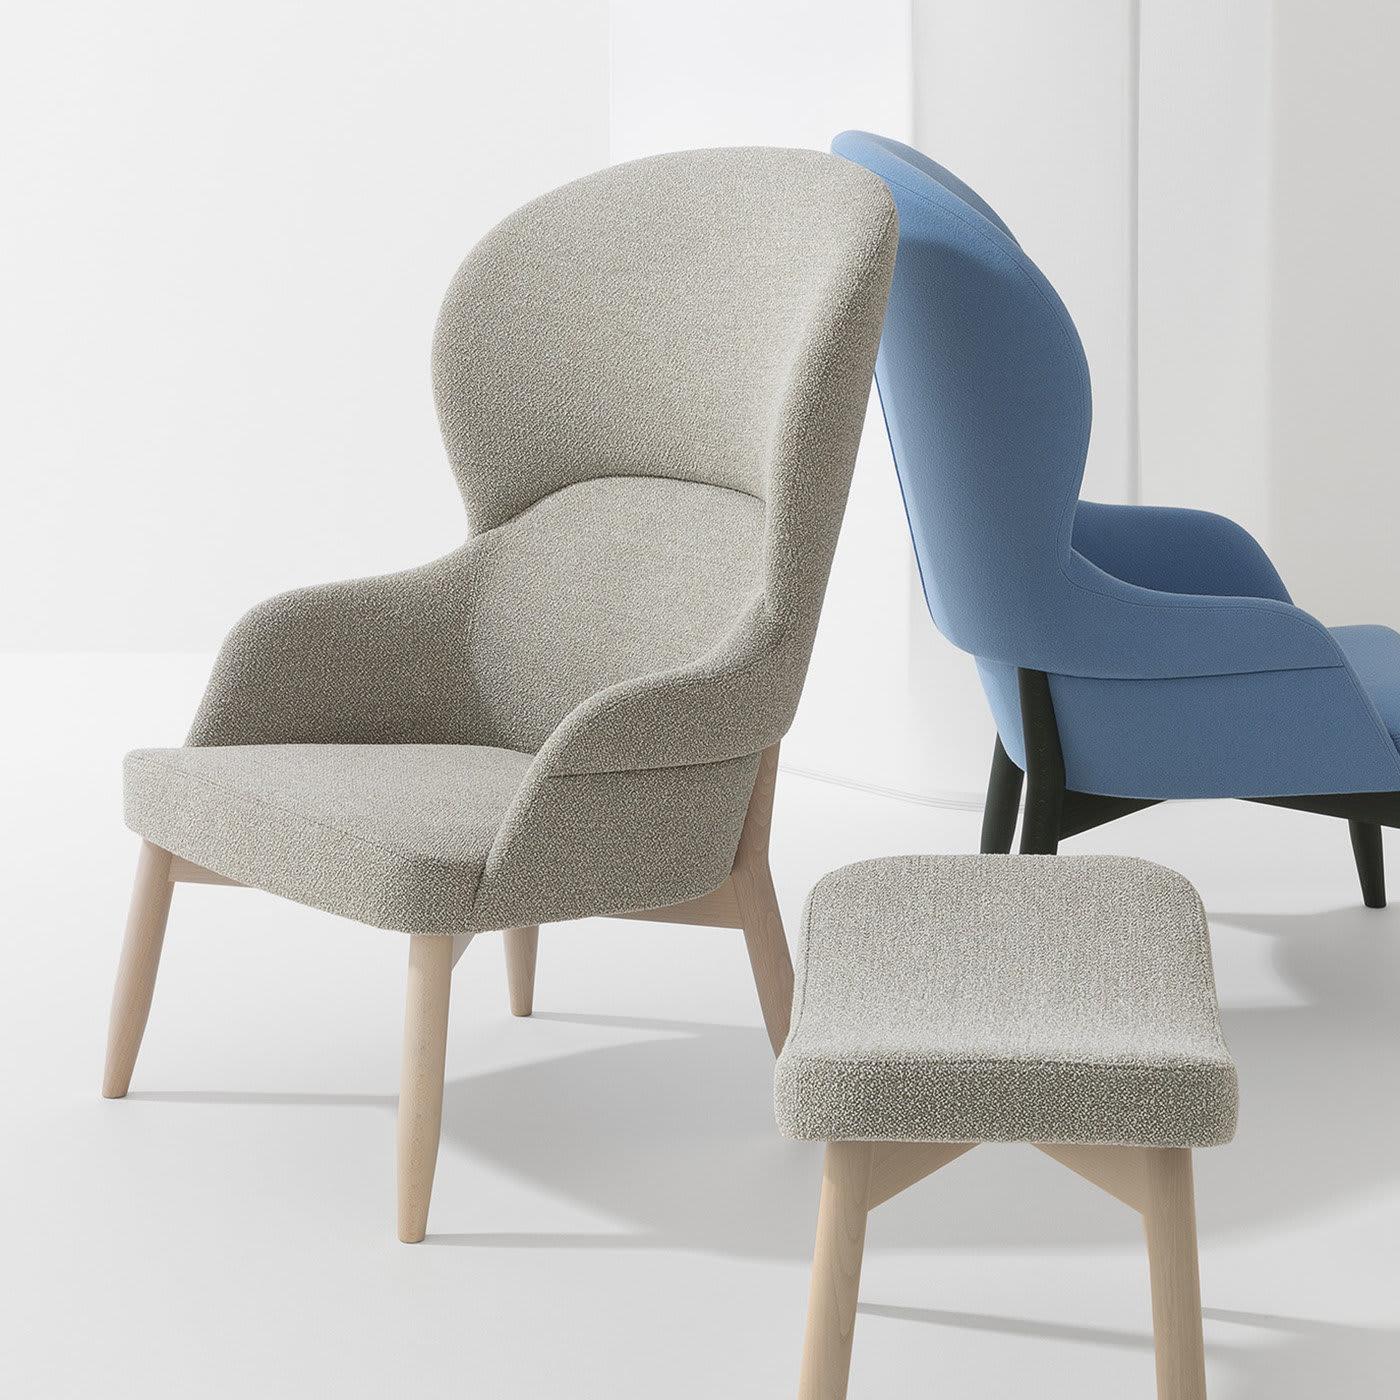 This elegant design defined by soft curves is an invitation to relax while sipping a good glass of wine. Four tapered legs in whitened beech - same material composing the armchair's frame - sustain the welcoming seat (height 43 cm) fully enveloped